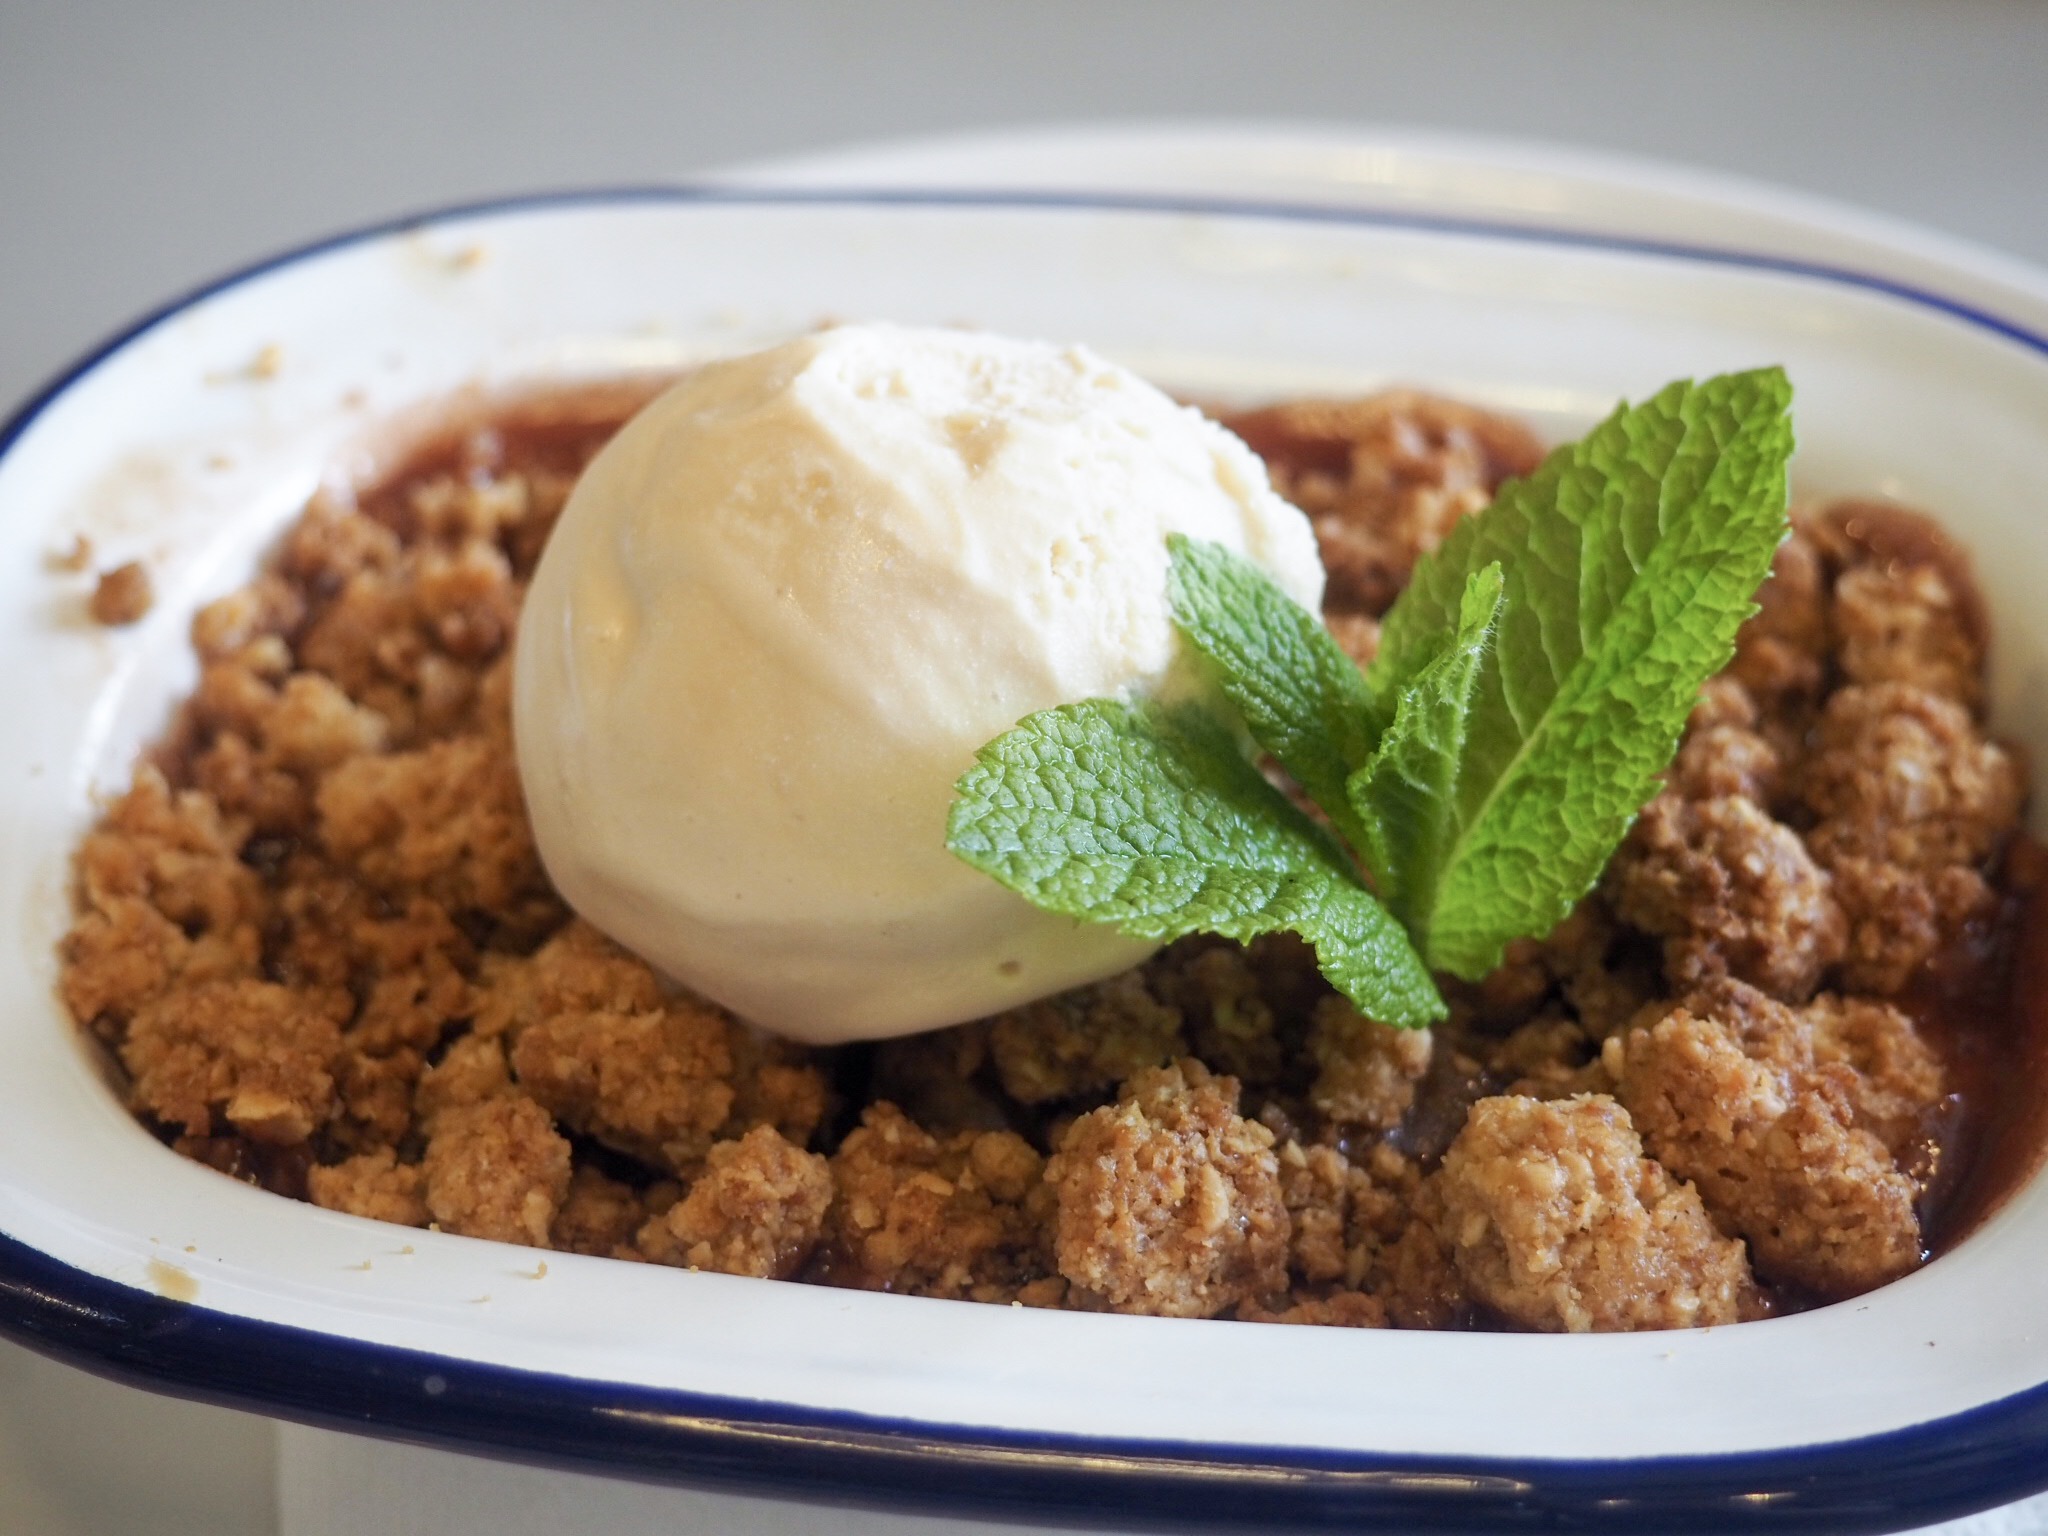 Bill's plum and apple crumble